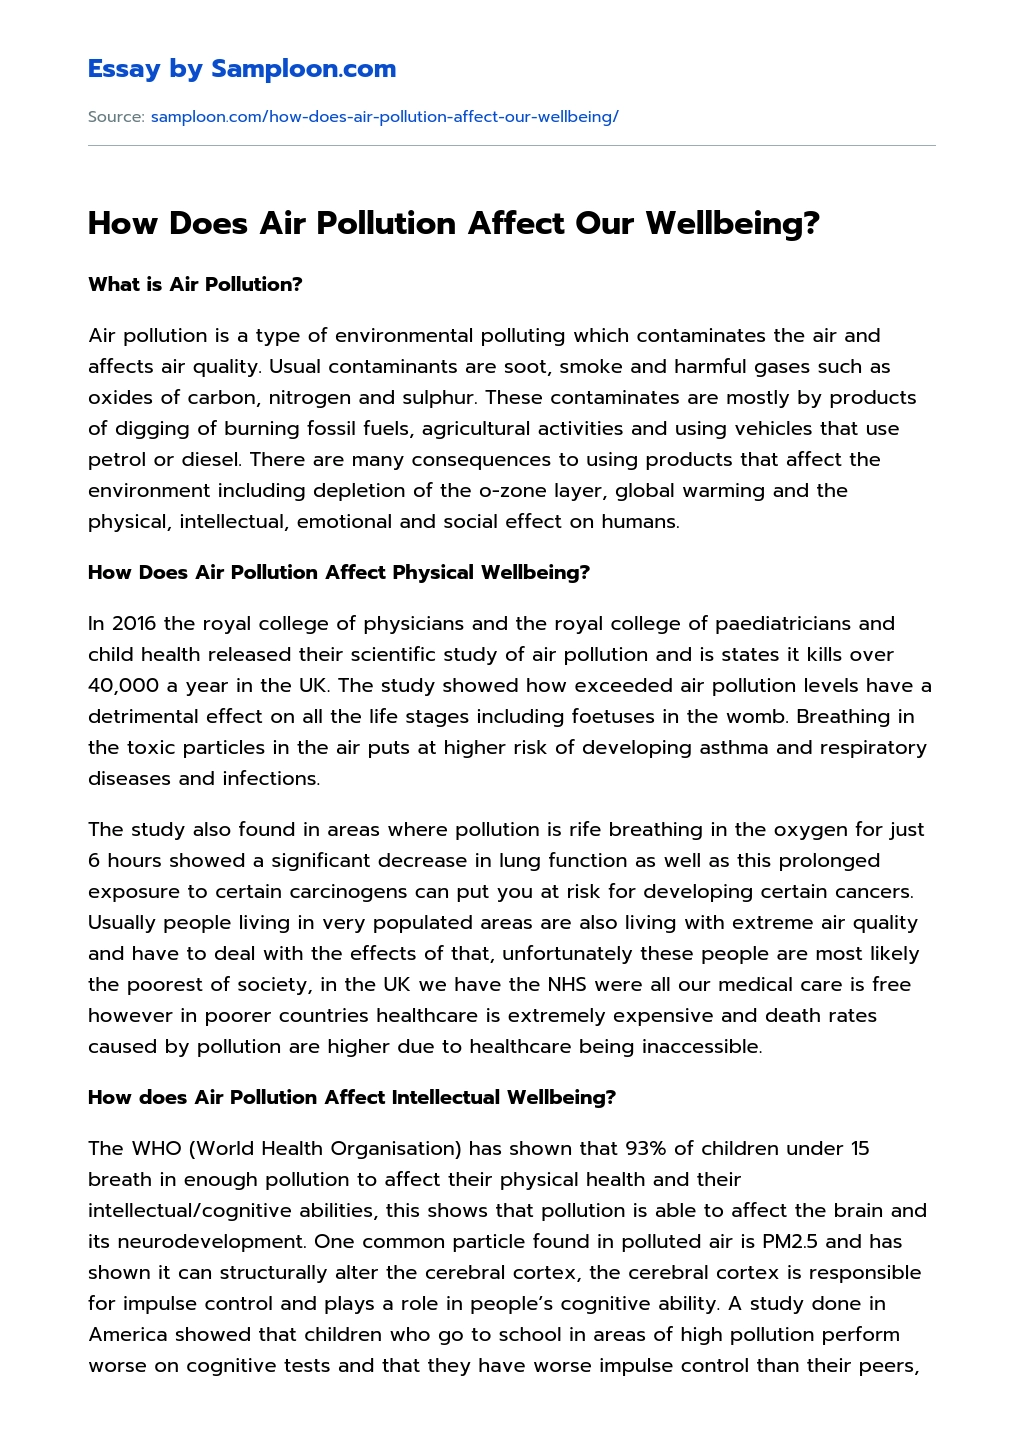 How Does Air Pollution Affect Our Wellbeing? essay